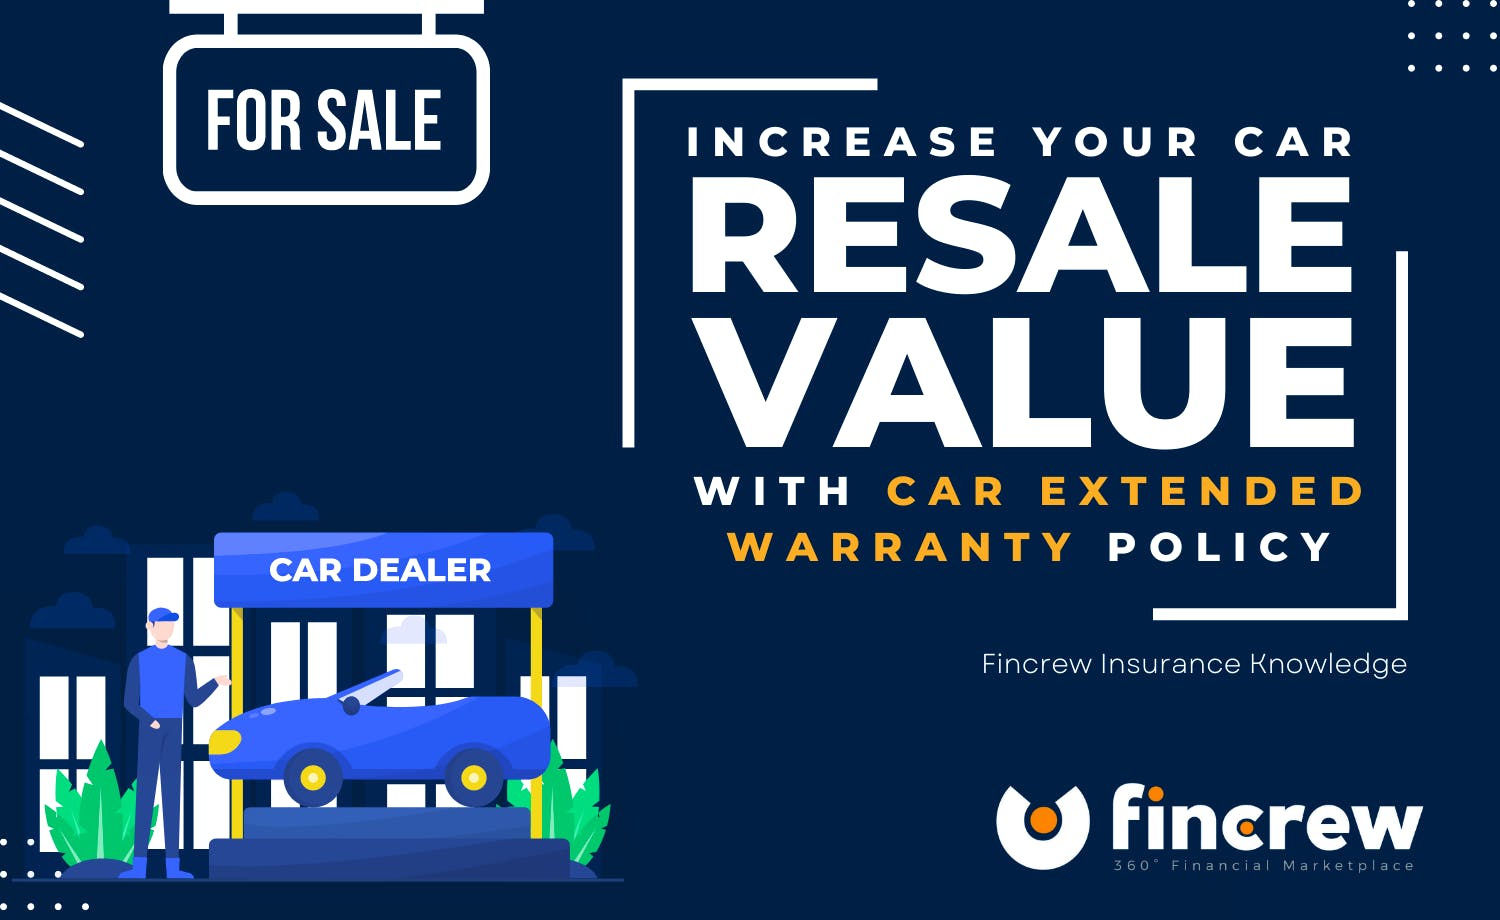 Increase Your Car Resale Value With An Extended Warranty